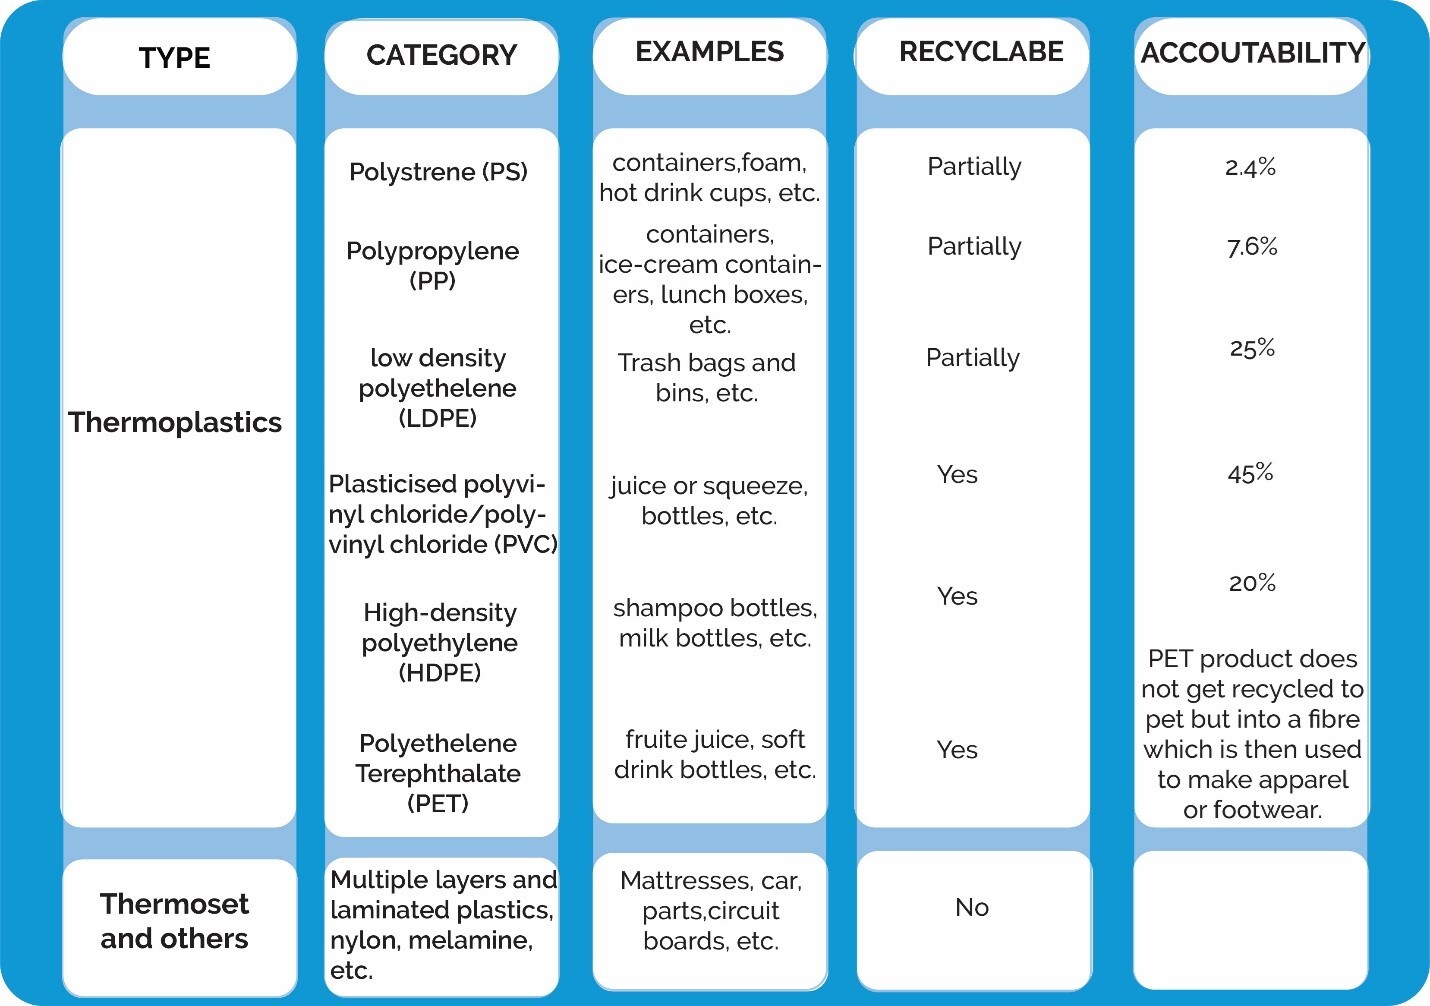 How Much and What Type of Plastic is India Recycling?